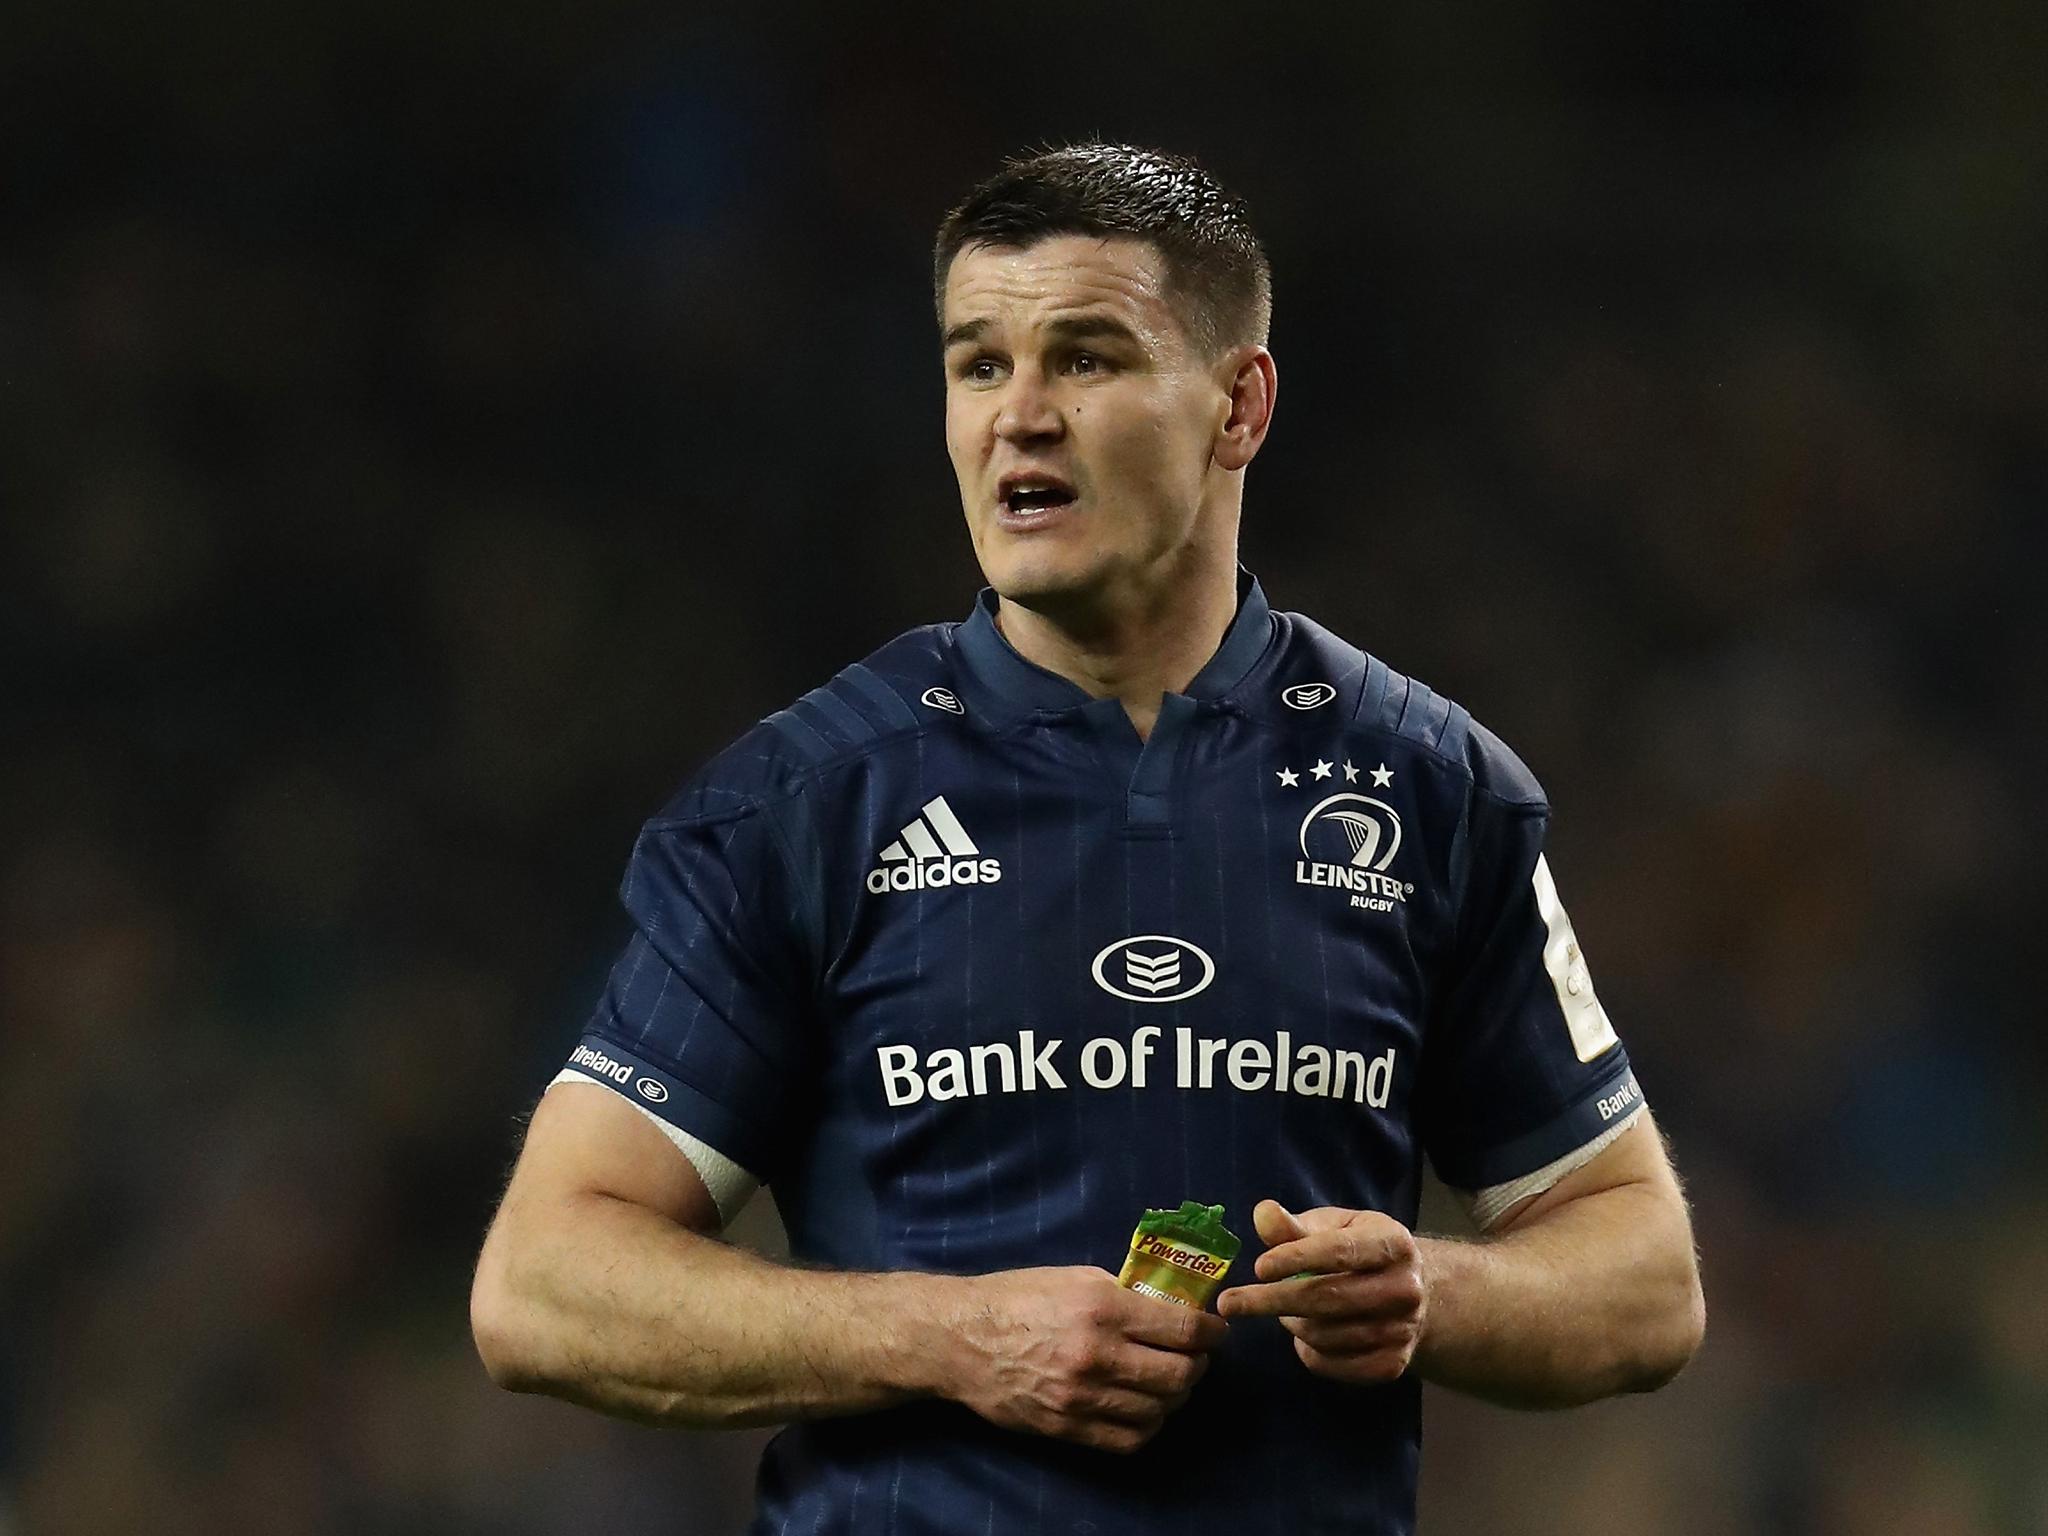 Johnny Sexton returns to start Leinster's Champions Cup quarter-final against Toulouse